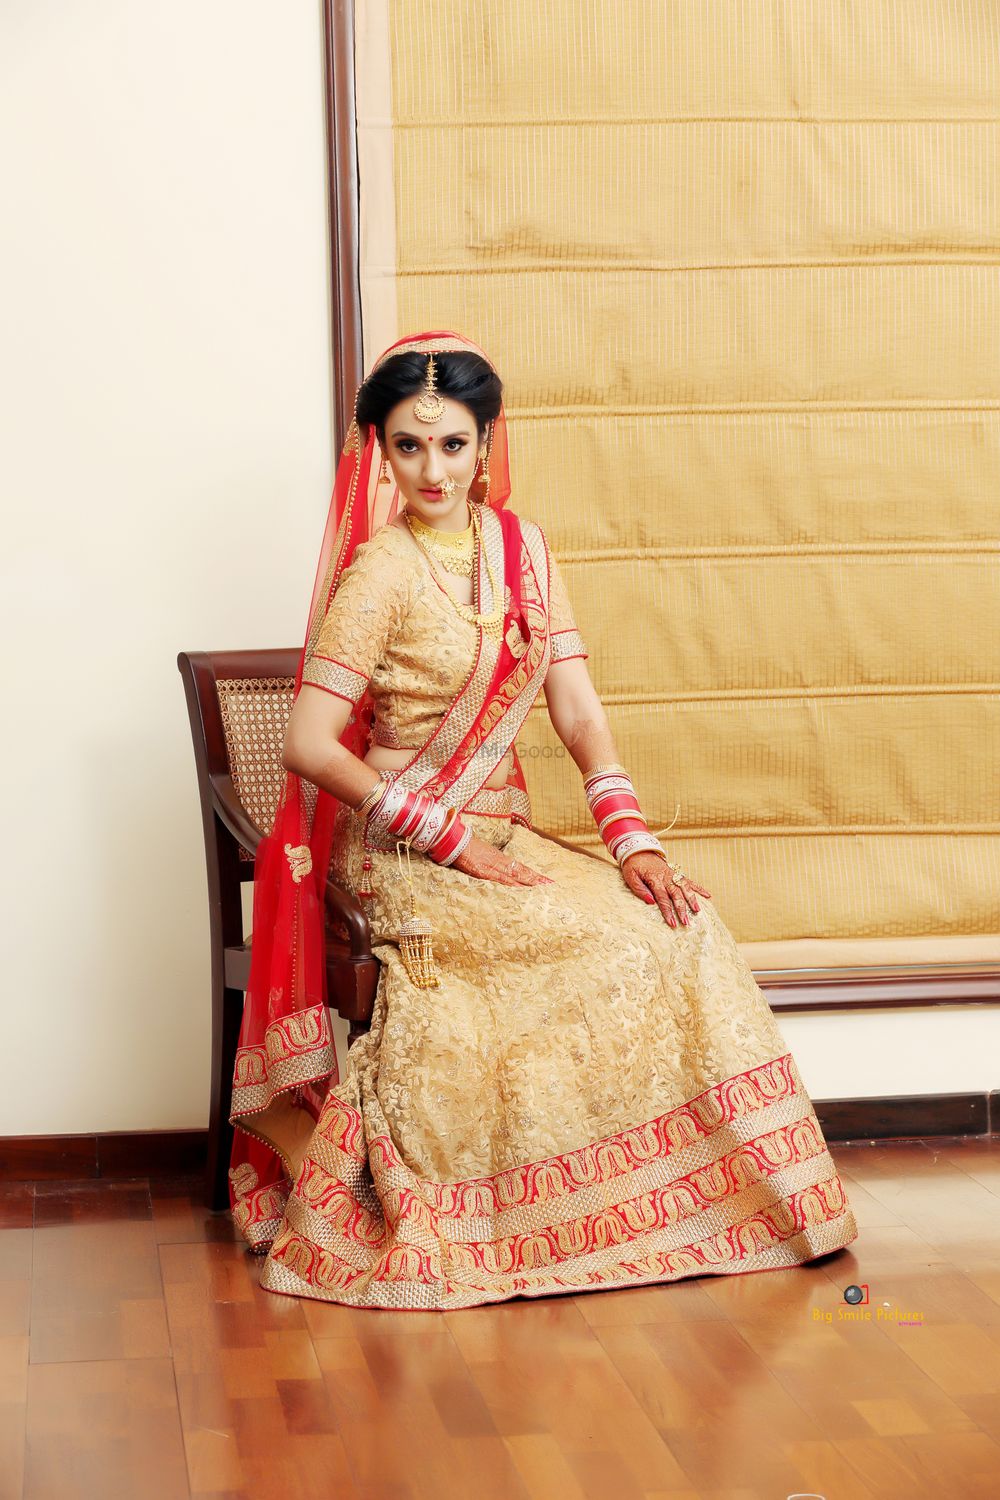 Photo From Chandeep + Simran - By Big Smile Pictures